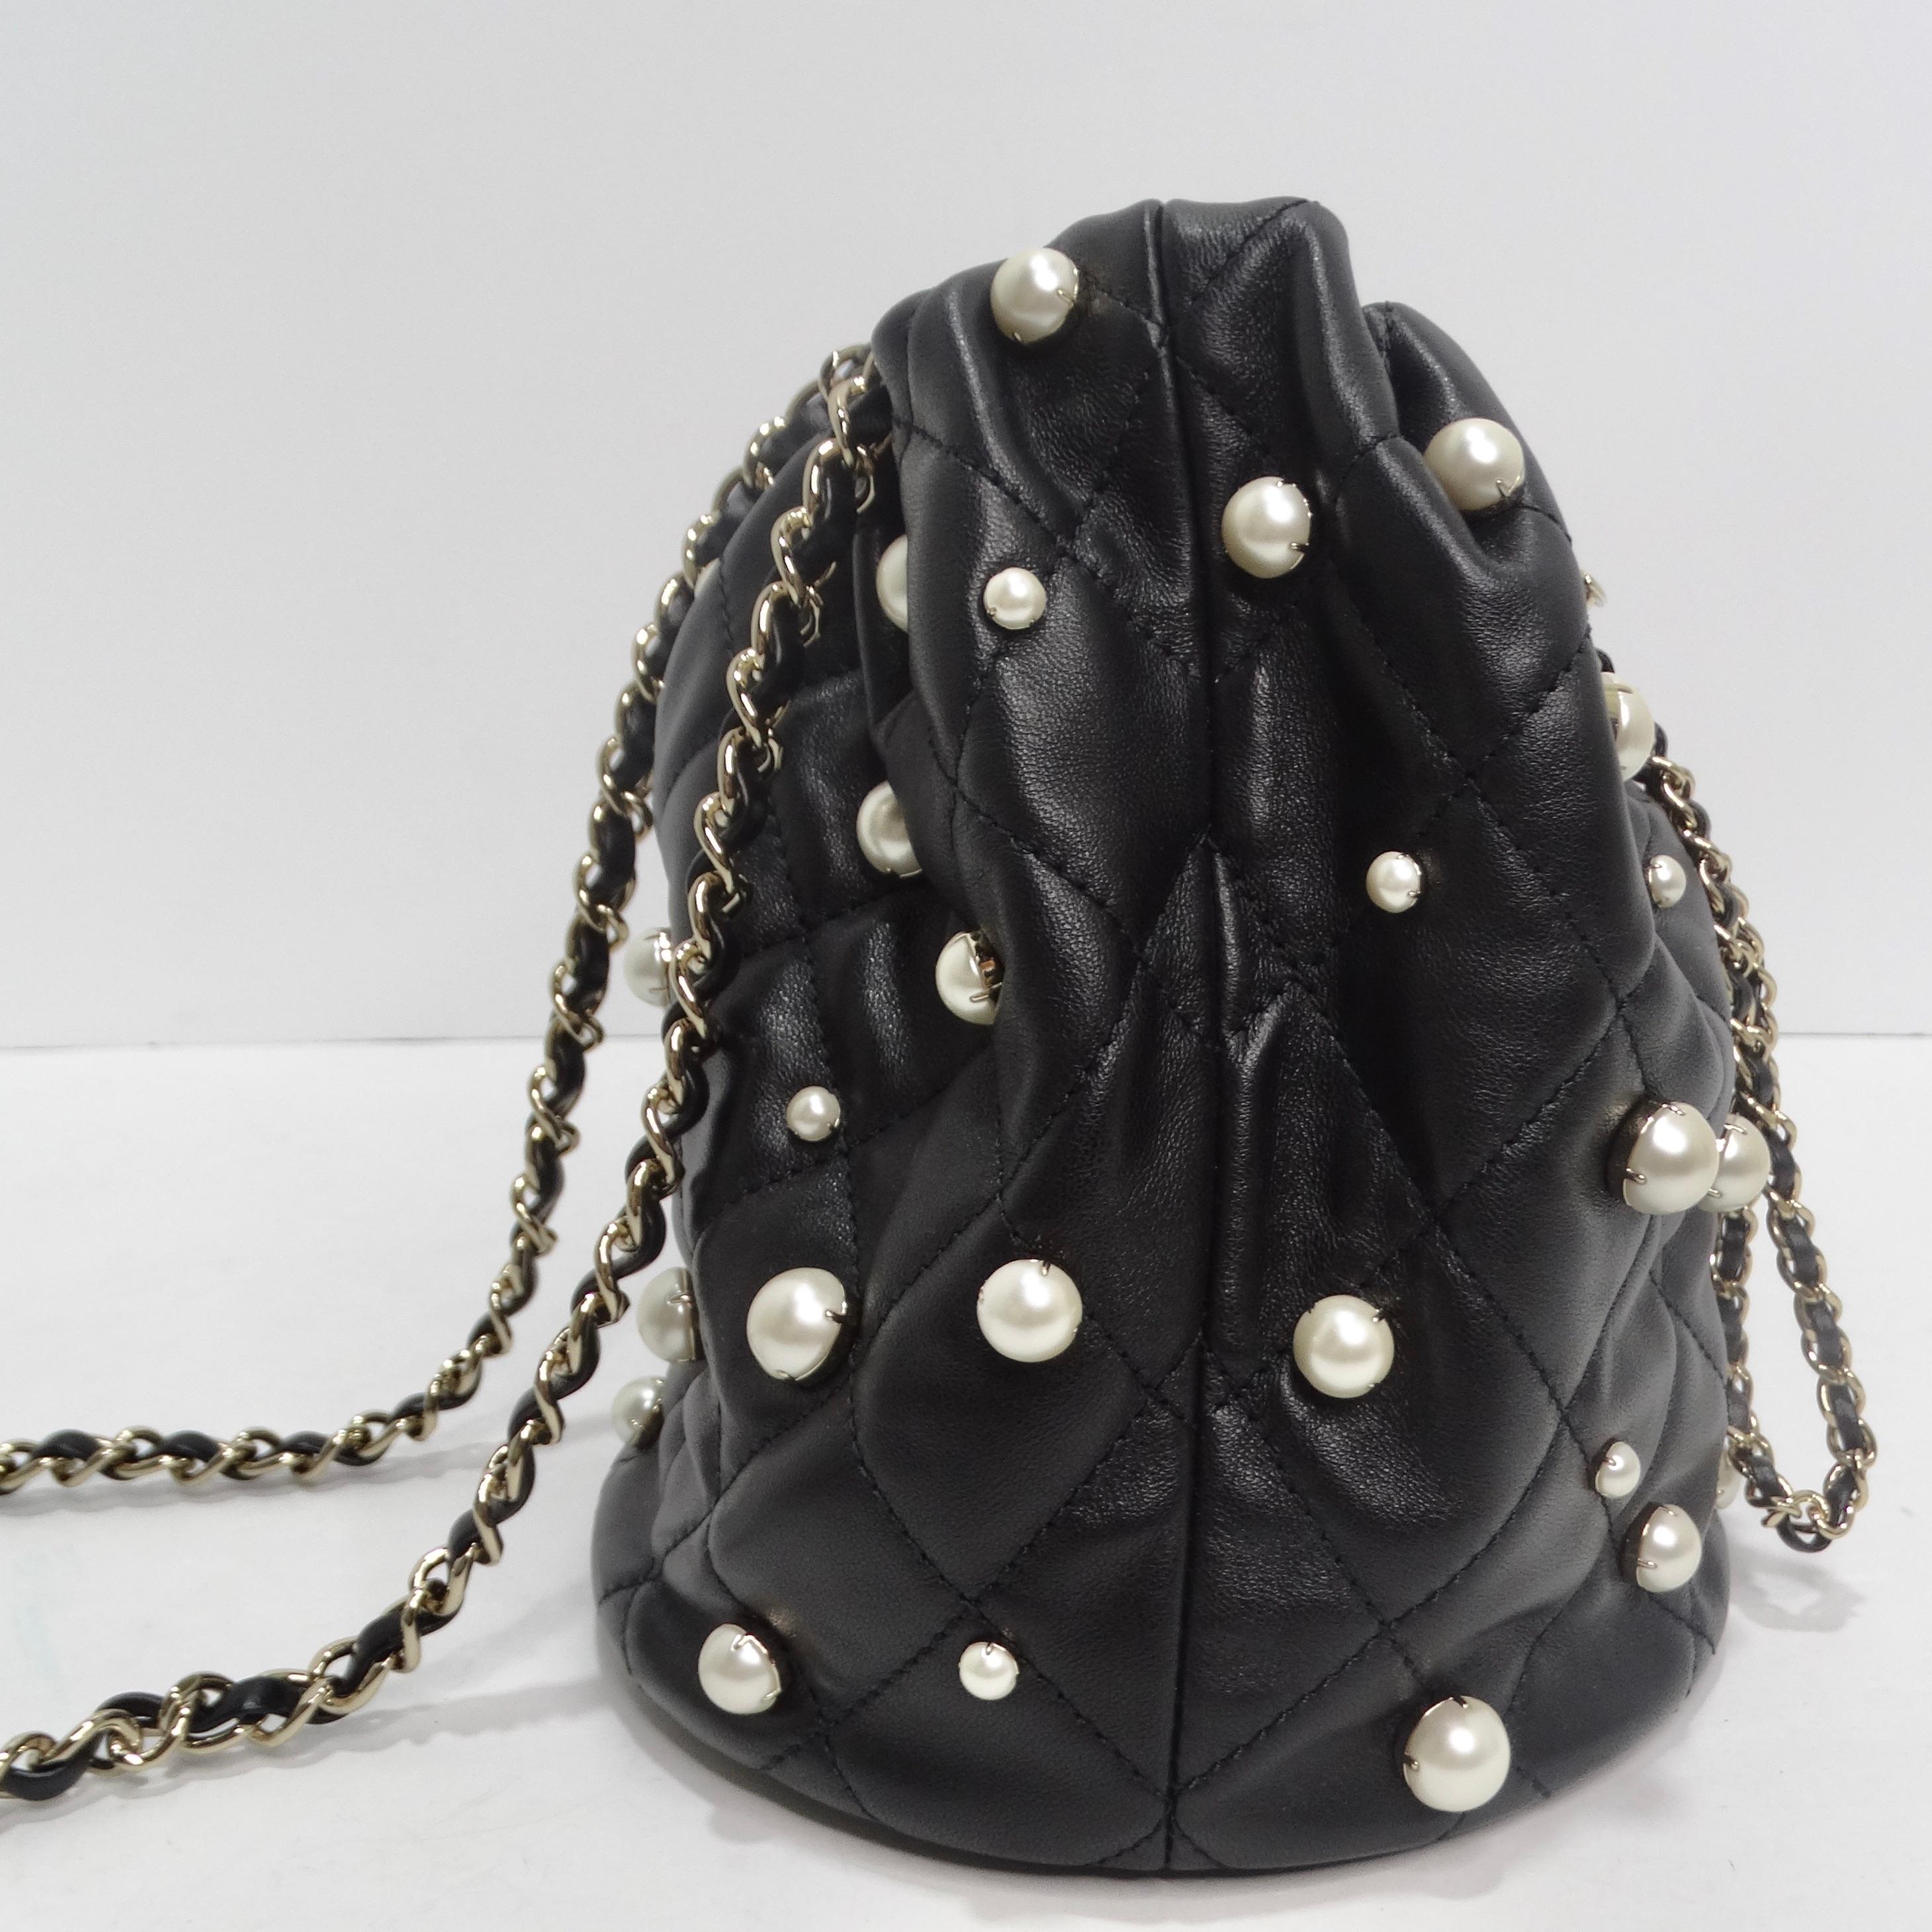 Get your hands on a handbag that's not just an accessory but a work of art - the Chanel About Pearls Black Lambskin Drawstring Bucket Bag. This quilted black lambskin leather bucket bag features a leather threaded drawstring strap, opening to a